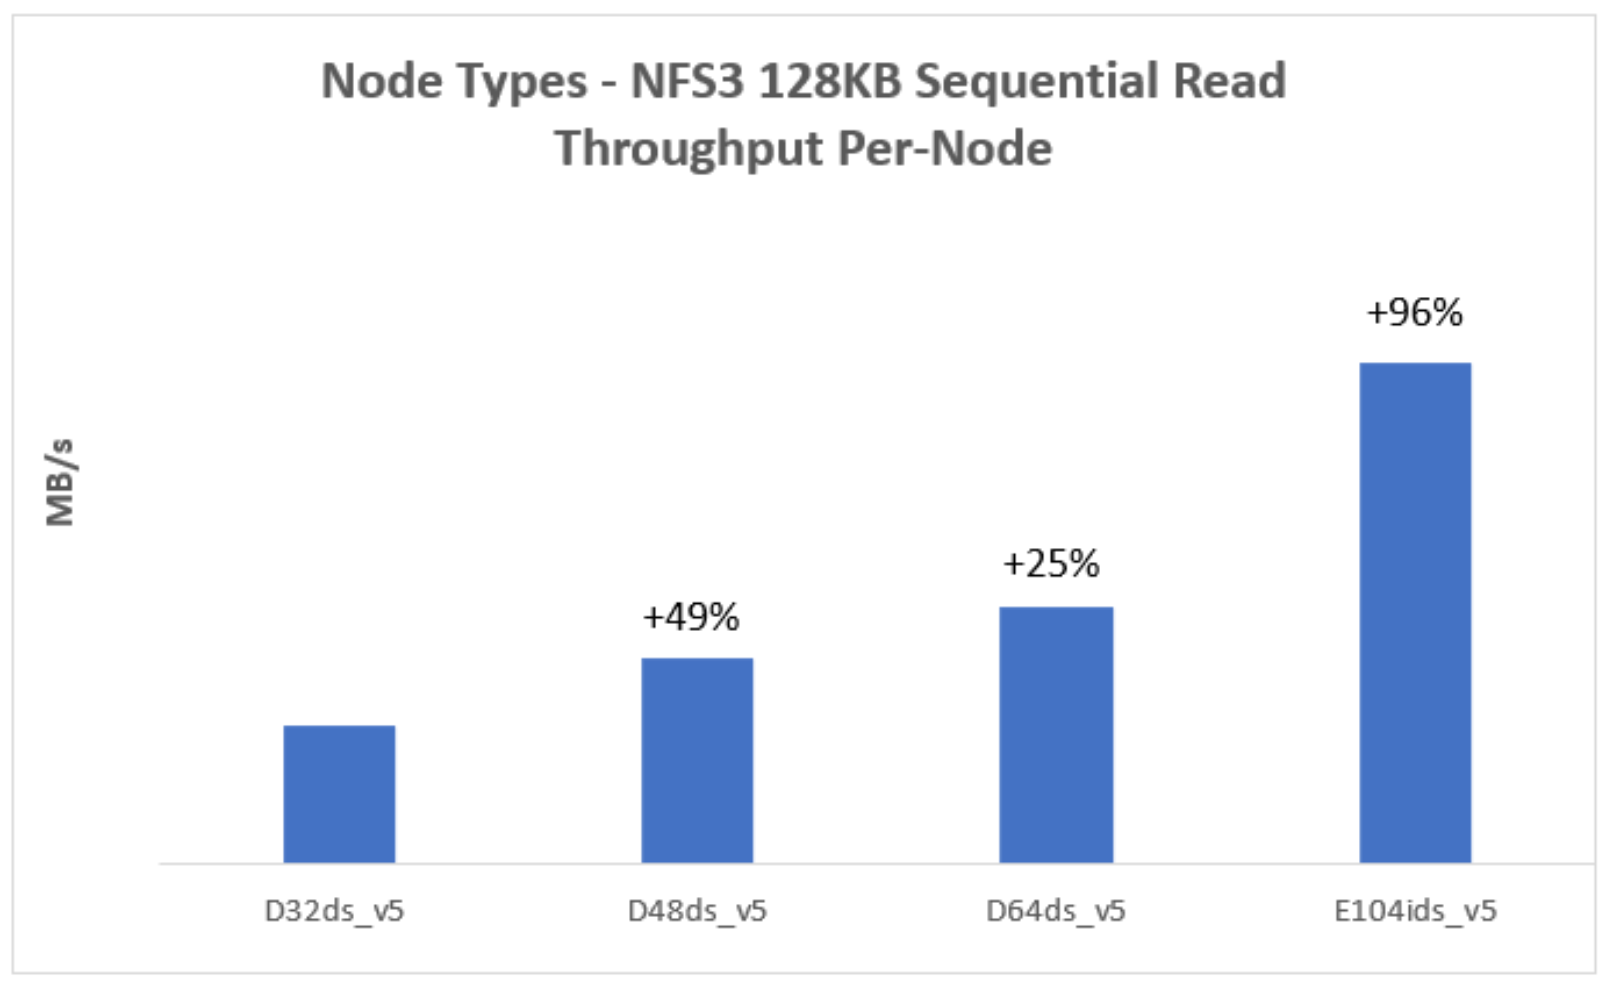 A figure of sequential read throughput for different node types, D32ds_v5, D48ds_v5, D64ds_v5, E104ids_v5.1. The D48ds_v5 read throughput increases by 49% compared to D32ds_v5.2. The D64ds_v5 read throughput increases by 25% compared to D48ds_v5.3. The E104ids_v5 read throughput increases by 96% compared to D64ds_v5.